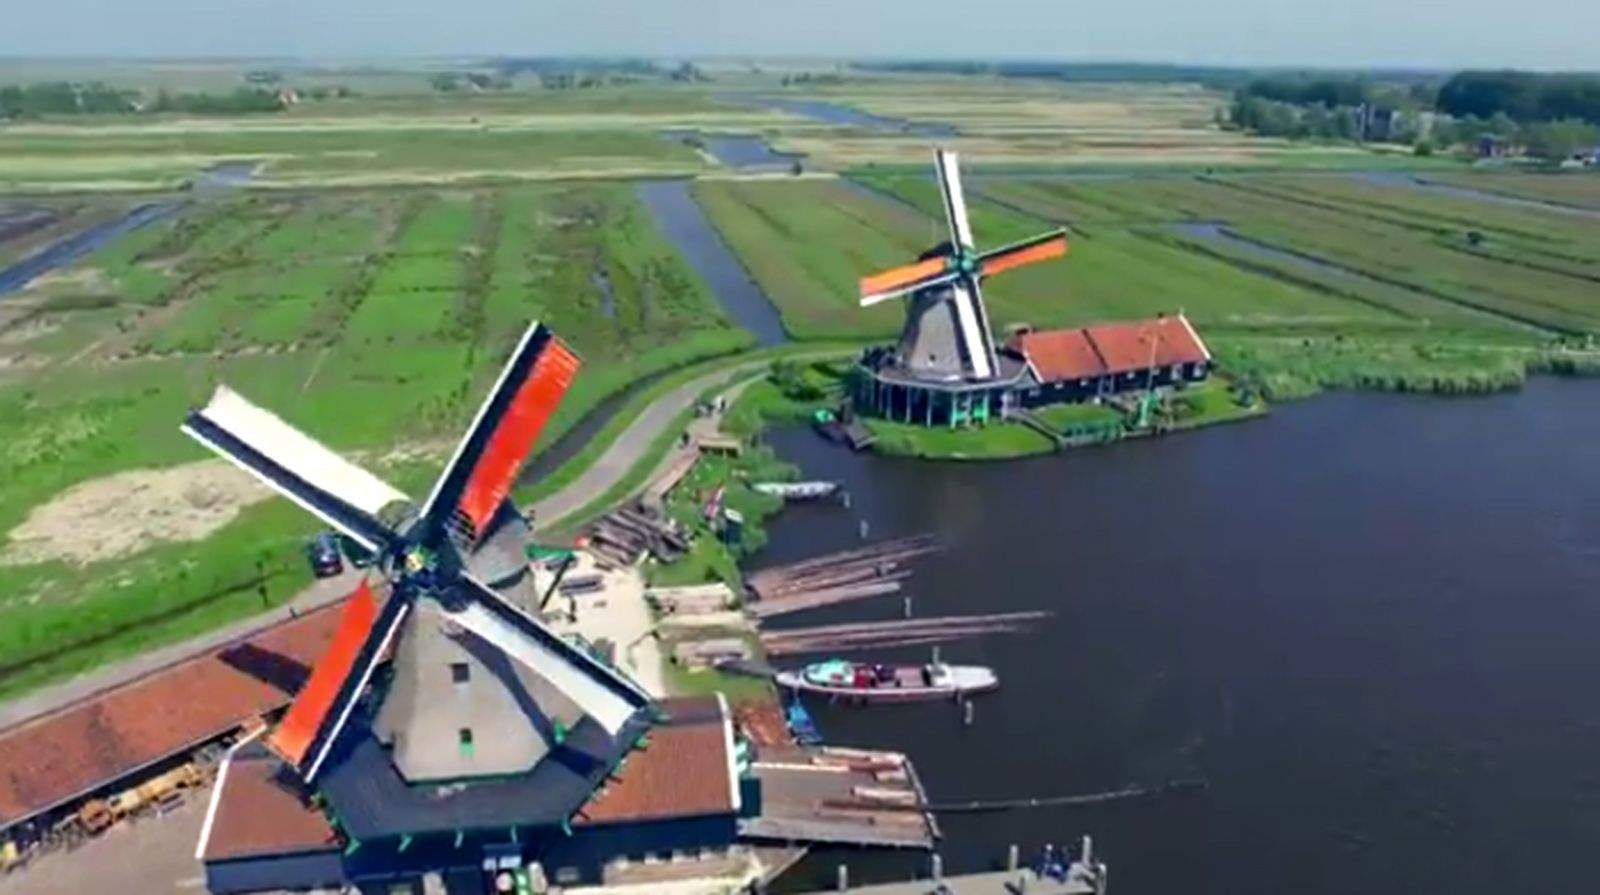 Windmills, especialy the ones near the Zaanse schans, look pretty when filmed from a drone.